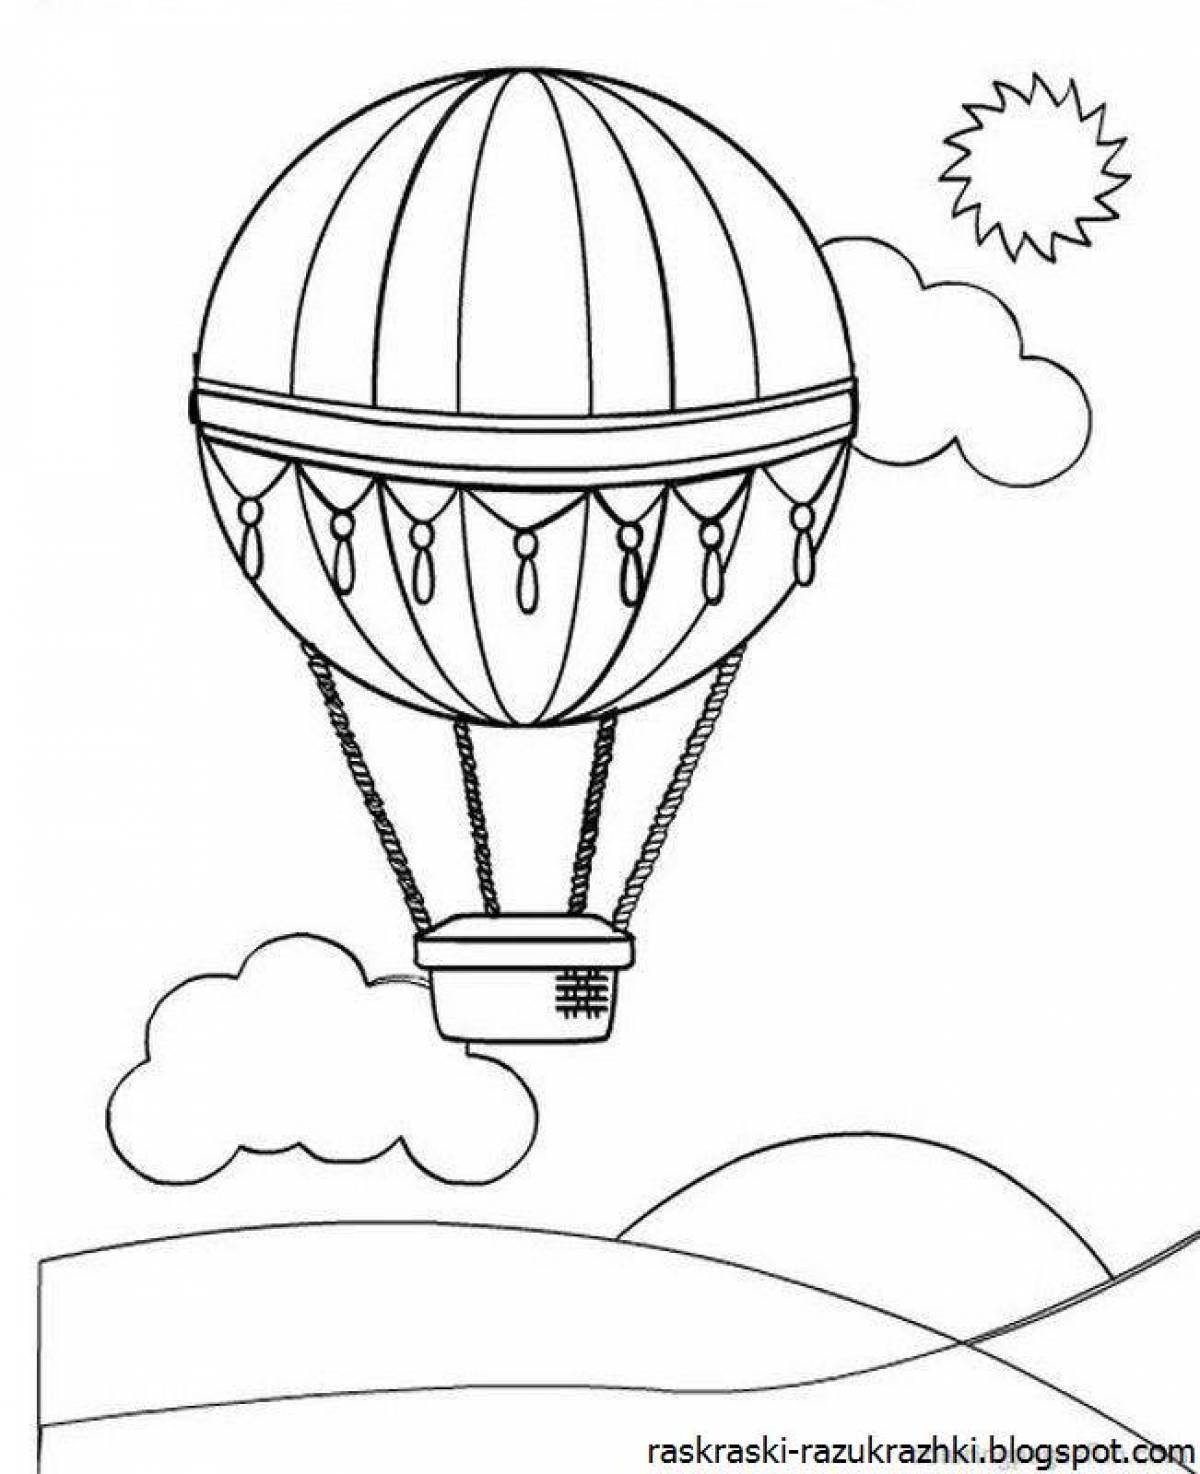 Exciting coloring book with balloons